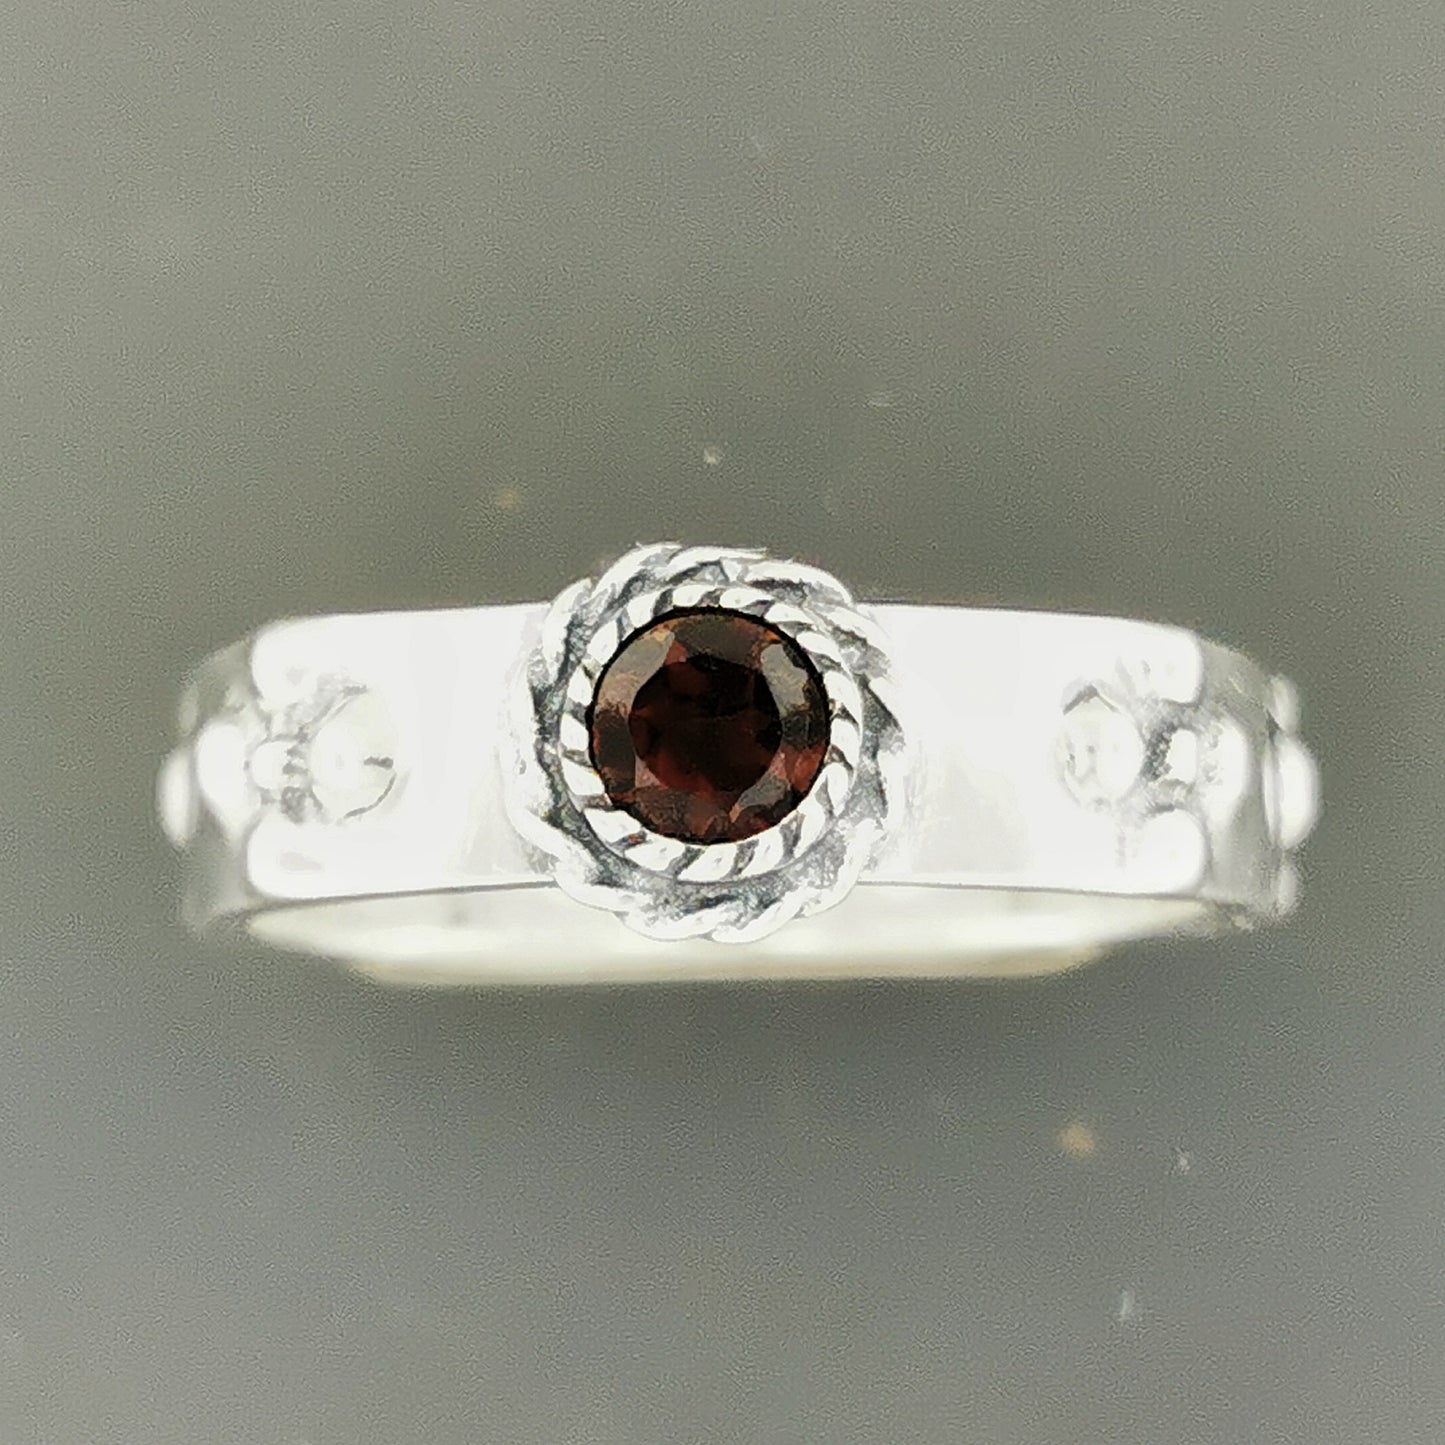 Howls Calcifer Fire Band in Sterling Silver, Gemstone Flower Band, howls moving castle engagement ring, howl's moving castle ring